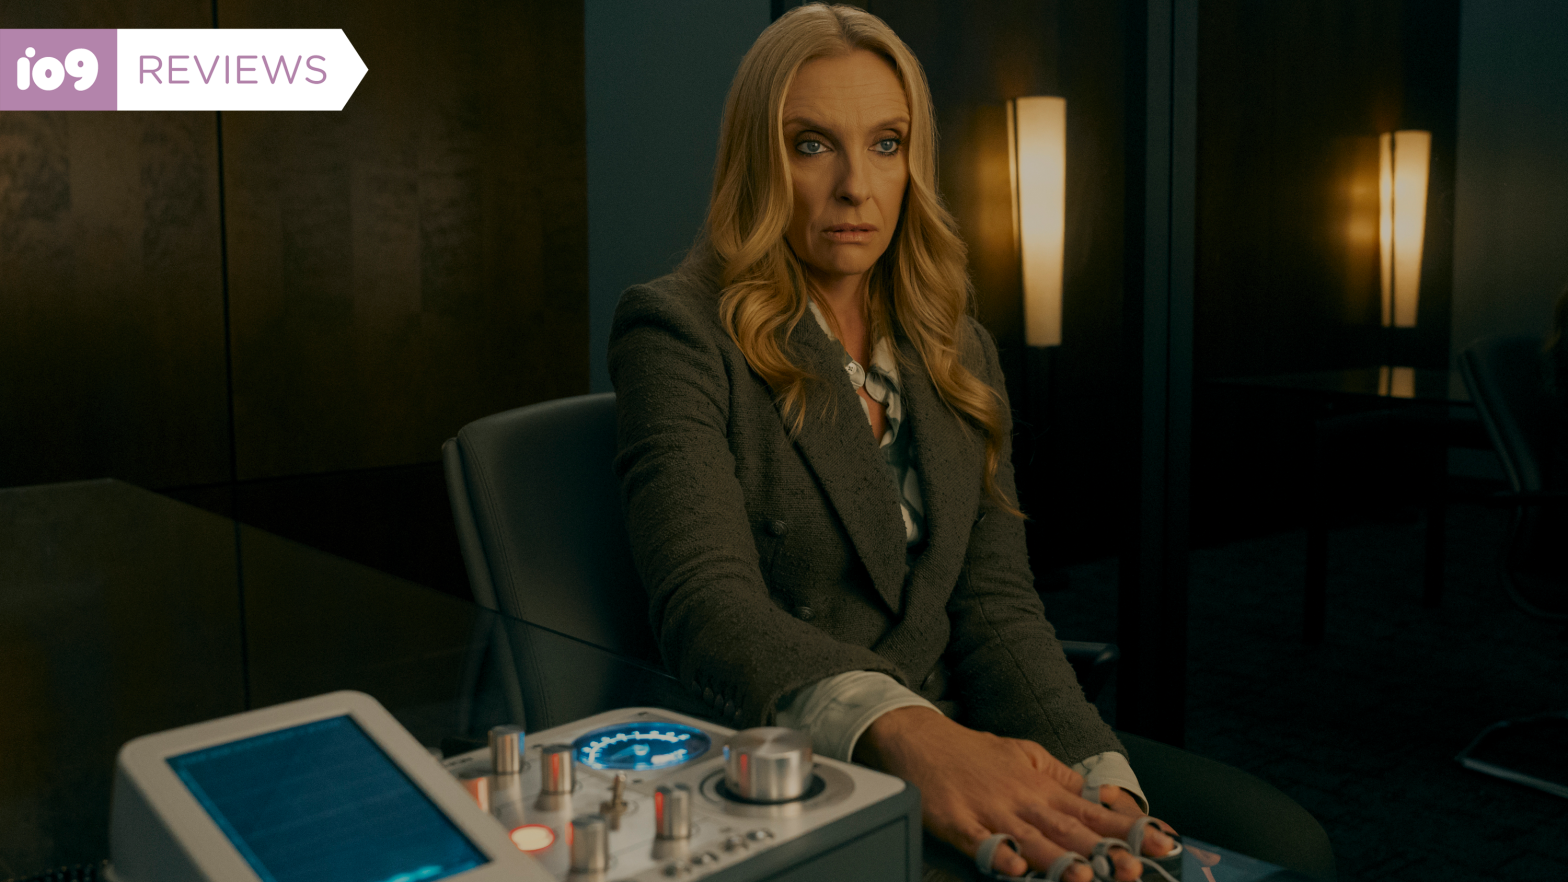 Toni Collette as Margot Cleary-Lopez, a Mayor who becomes the political face of the power (Image: Credit: Ludovic Robert/Amazon Prime Video)